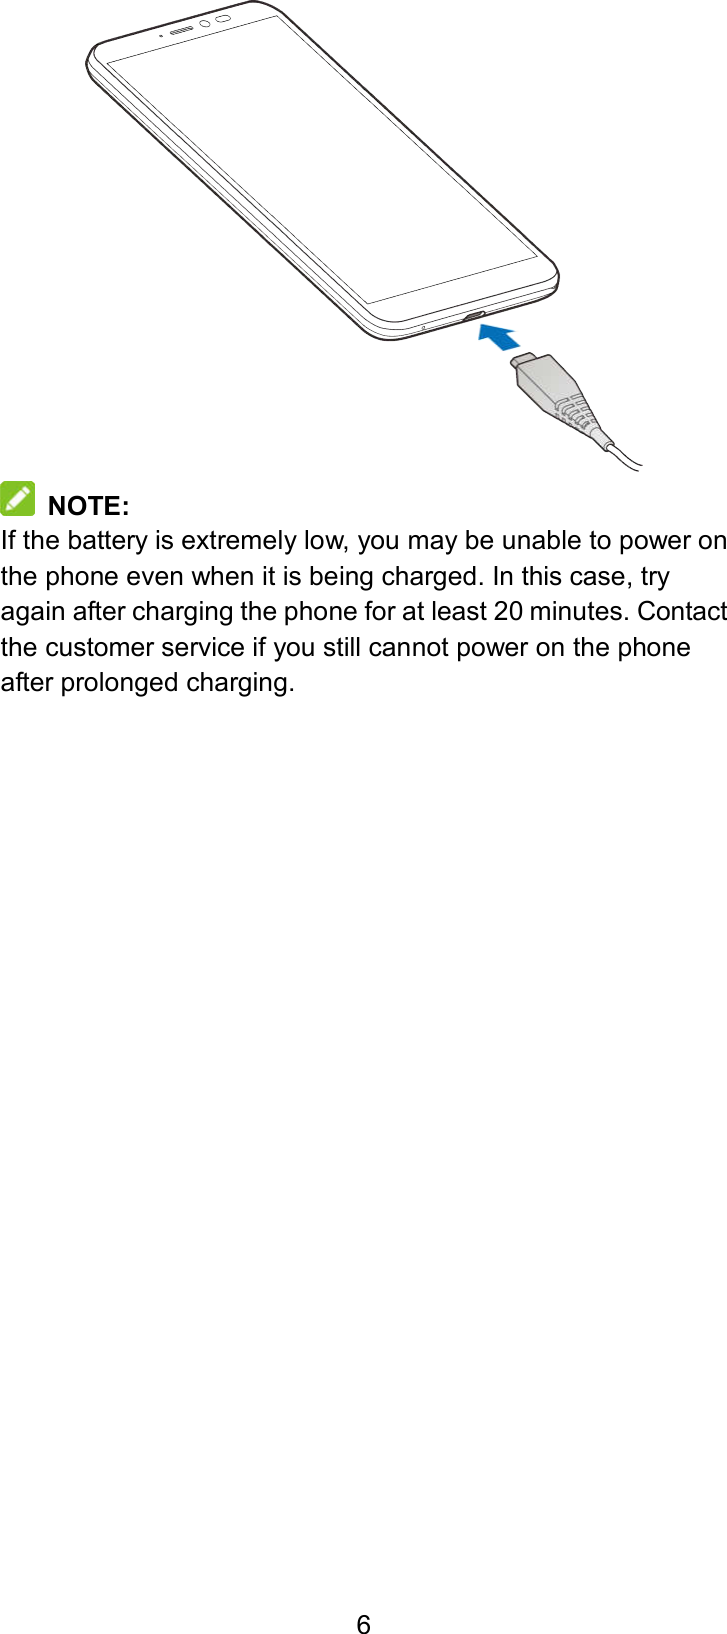  6    NOTE: If the battery is extremely low, you may be unable to power on the phone even when it is being charged. In this case, try again after charging the phone for at least 20 minutes. Contact the customer service if you still cannot power on the phone after prolonged charging.   